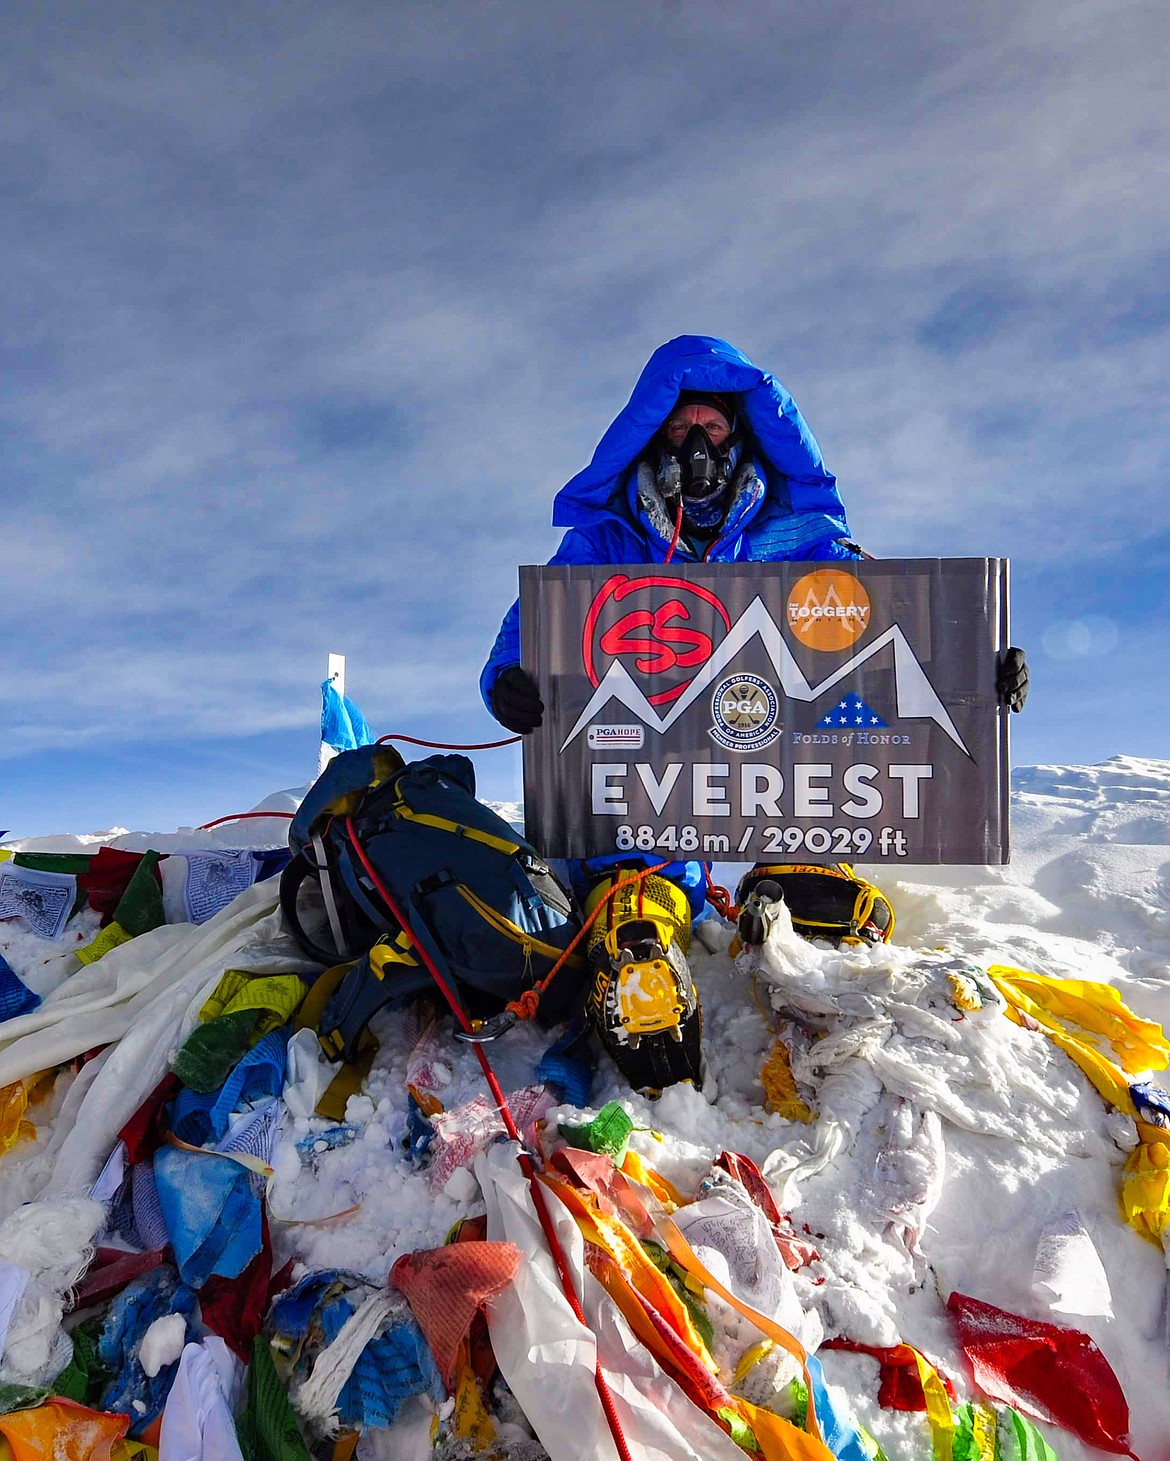 Steve Stevens celebrates at the top of the world, 29,029 feet above sea level on the summit of Mt. Everest, on May 12. (Photo courtesy of Steve Stevens)